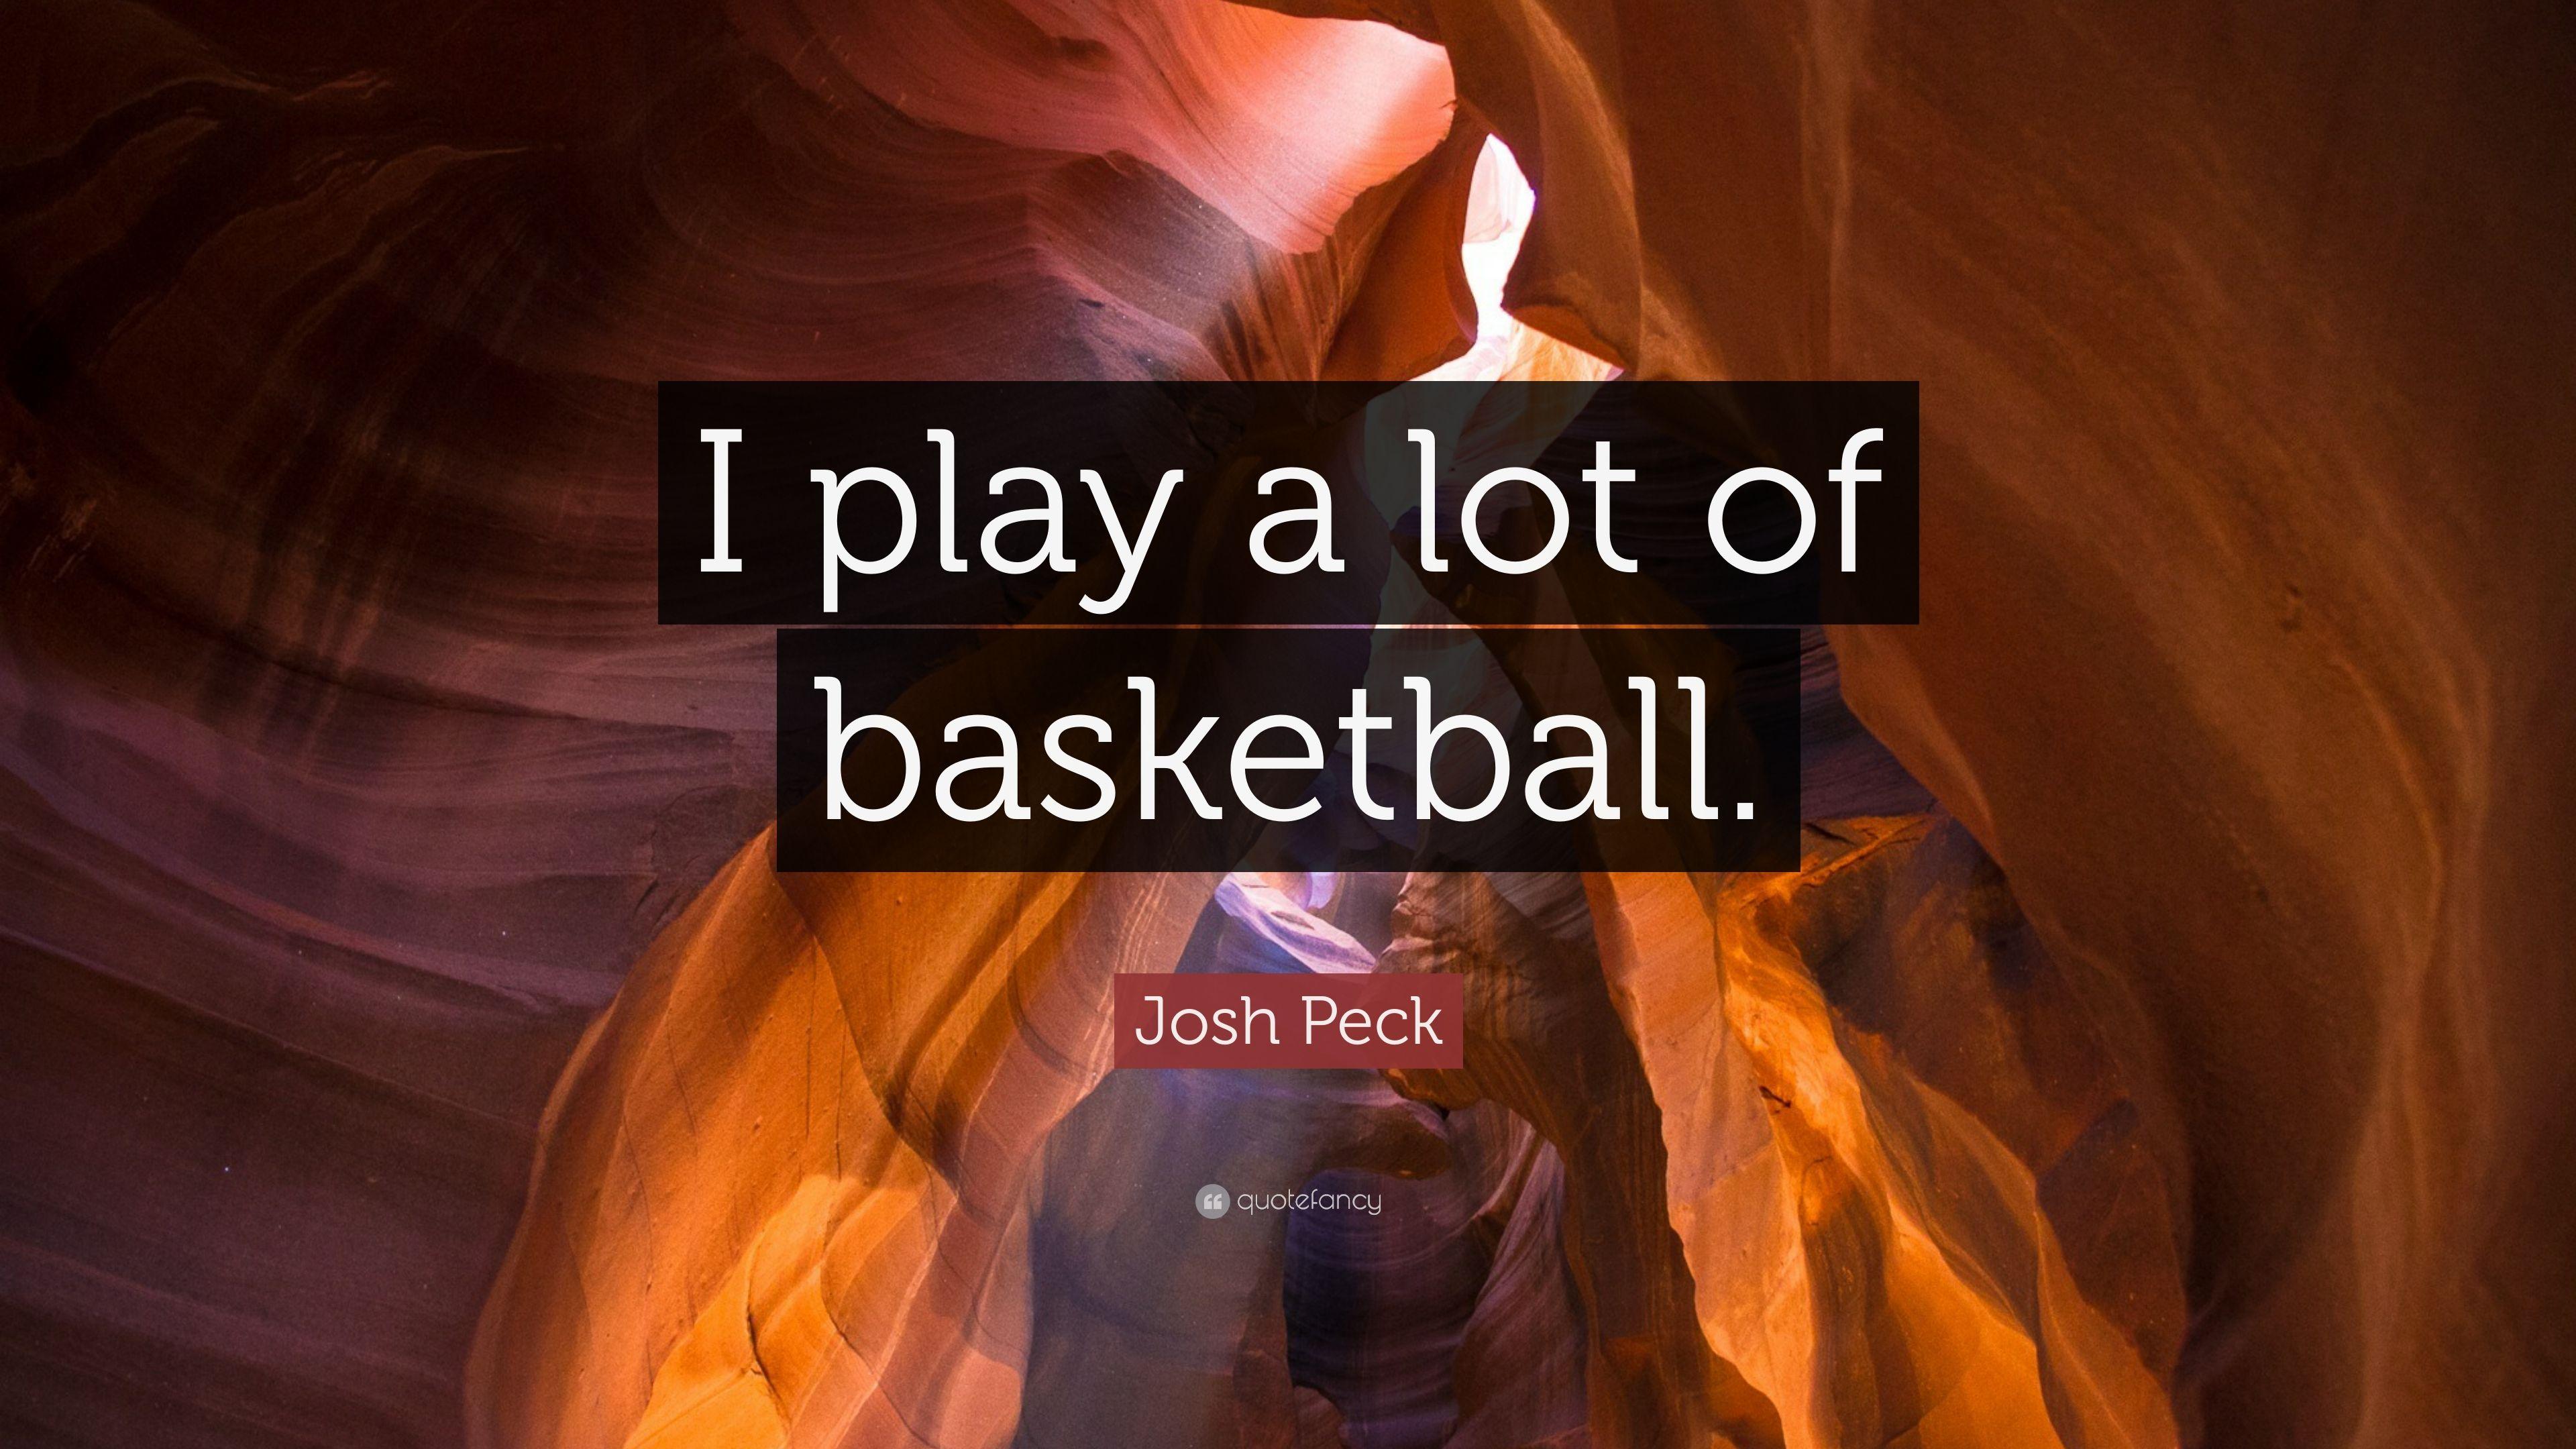 Josh Peck Quote: “I play a lot of basketball.” 7 wallpaper